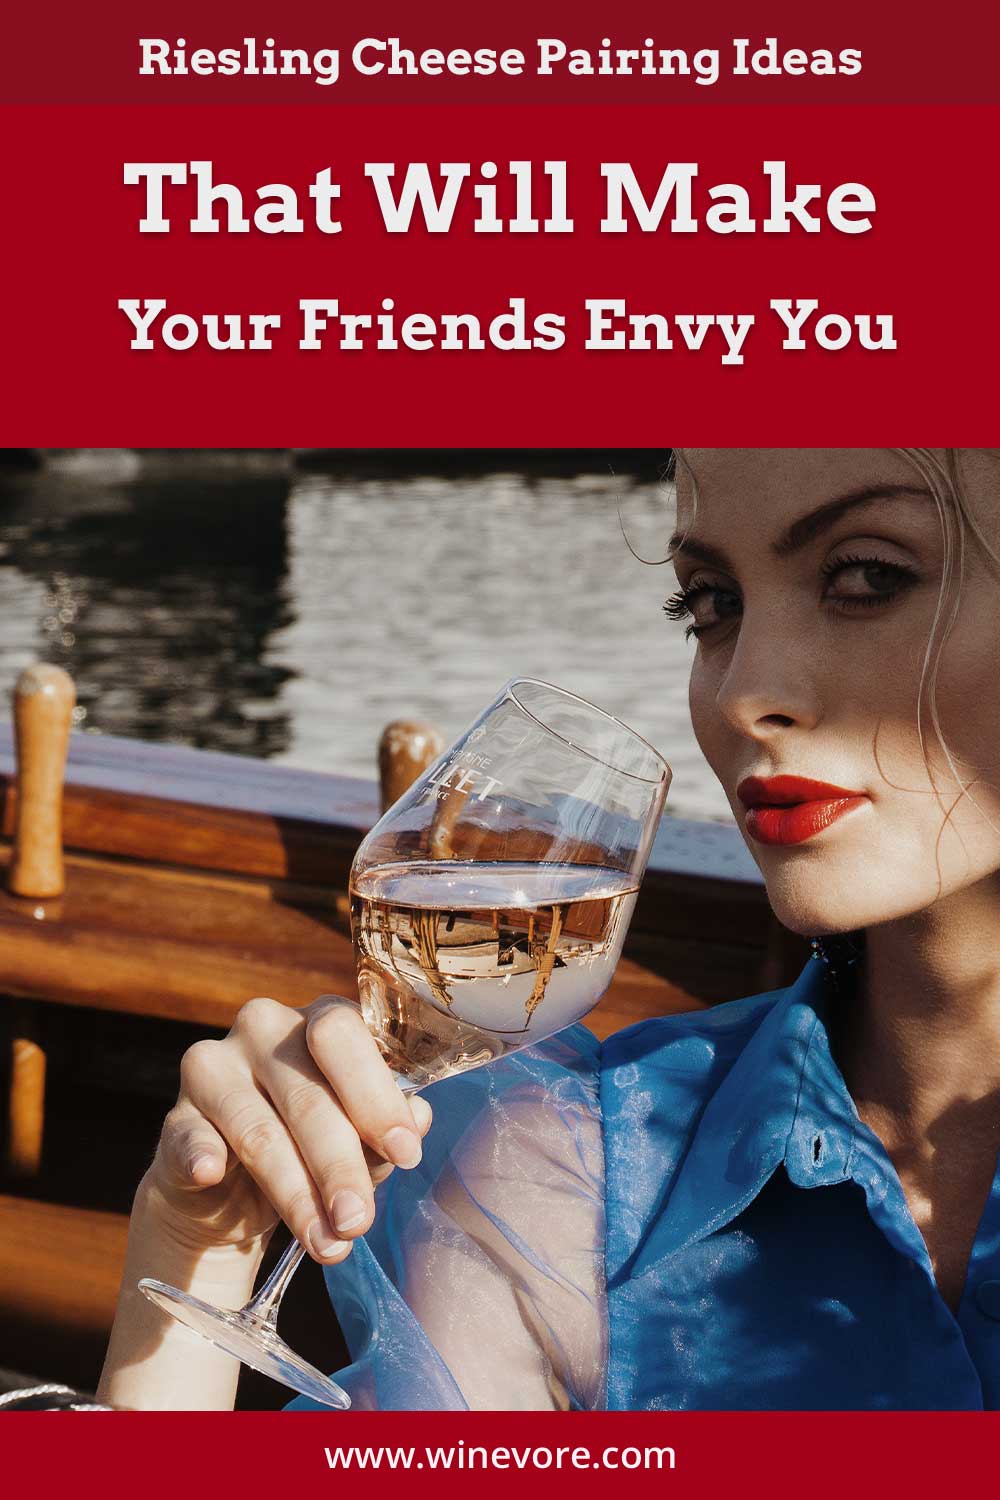 Woman on a boat with a wine glass in her hand - Riesling Cheese Pairing Ideas